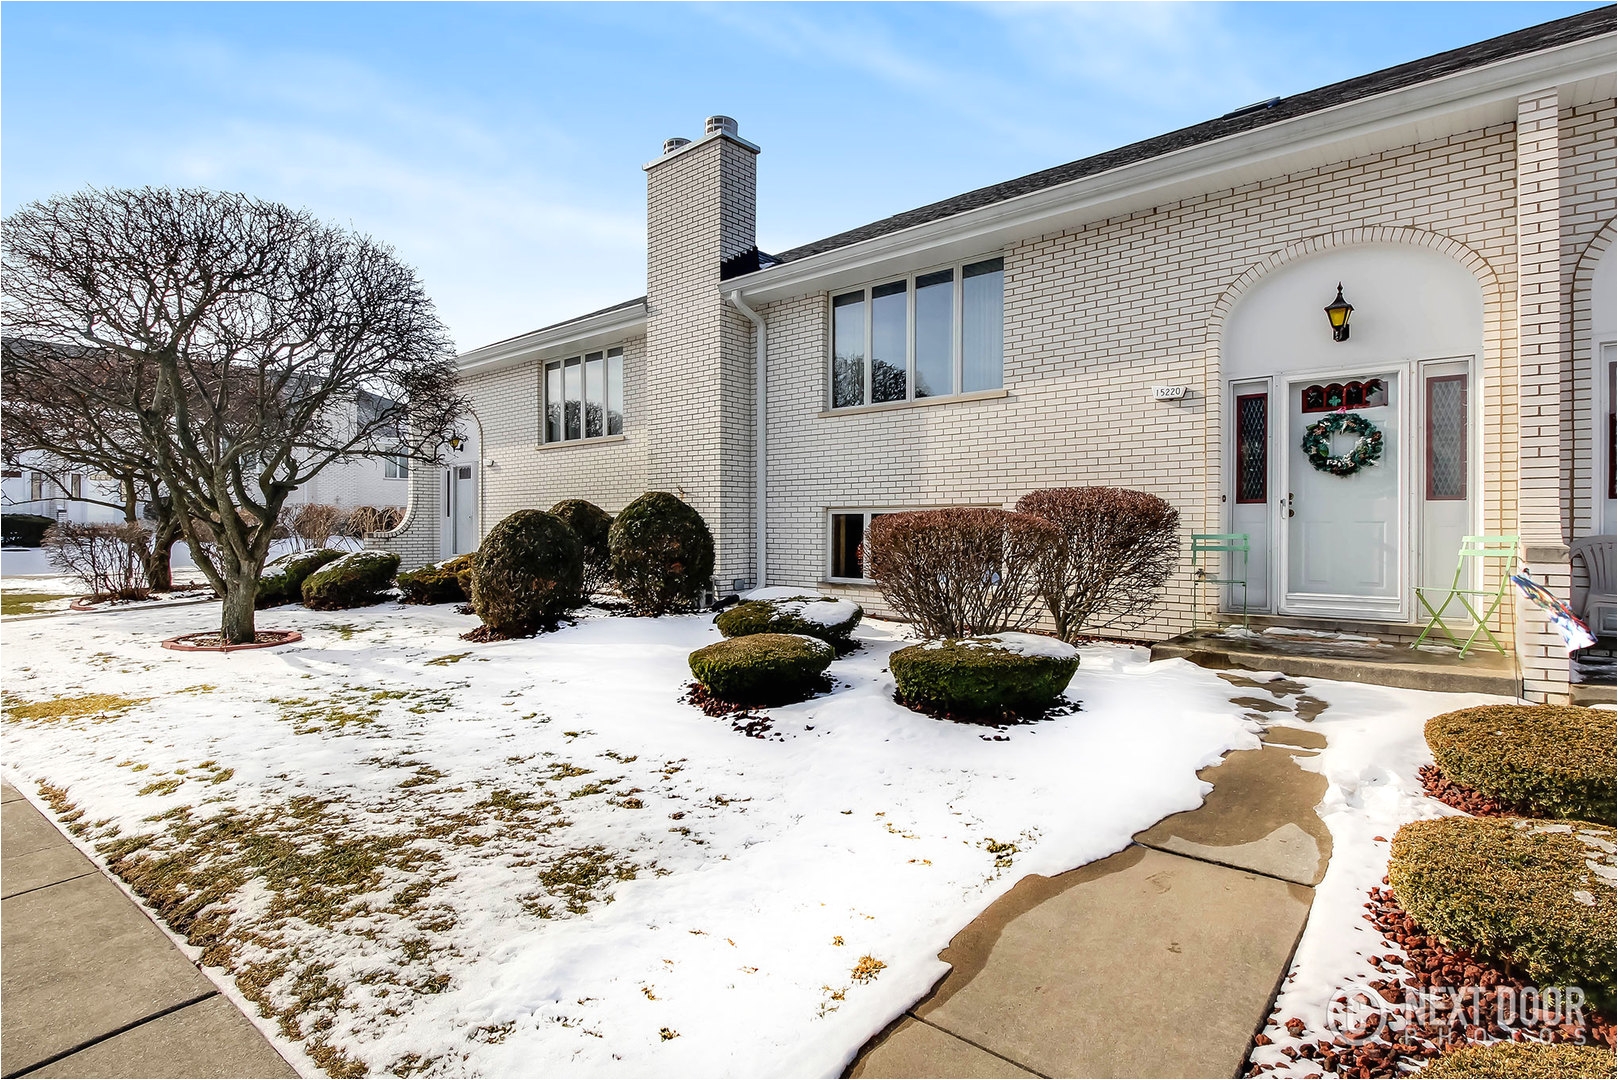 15220 south 72nd ct 27 orland park il 60462 mls 09840800 coldwell banker